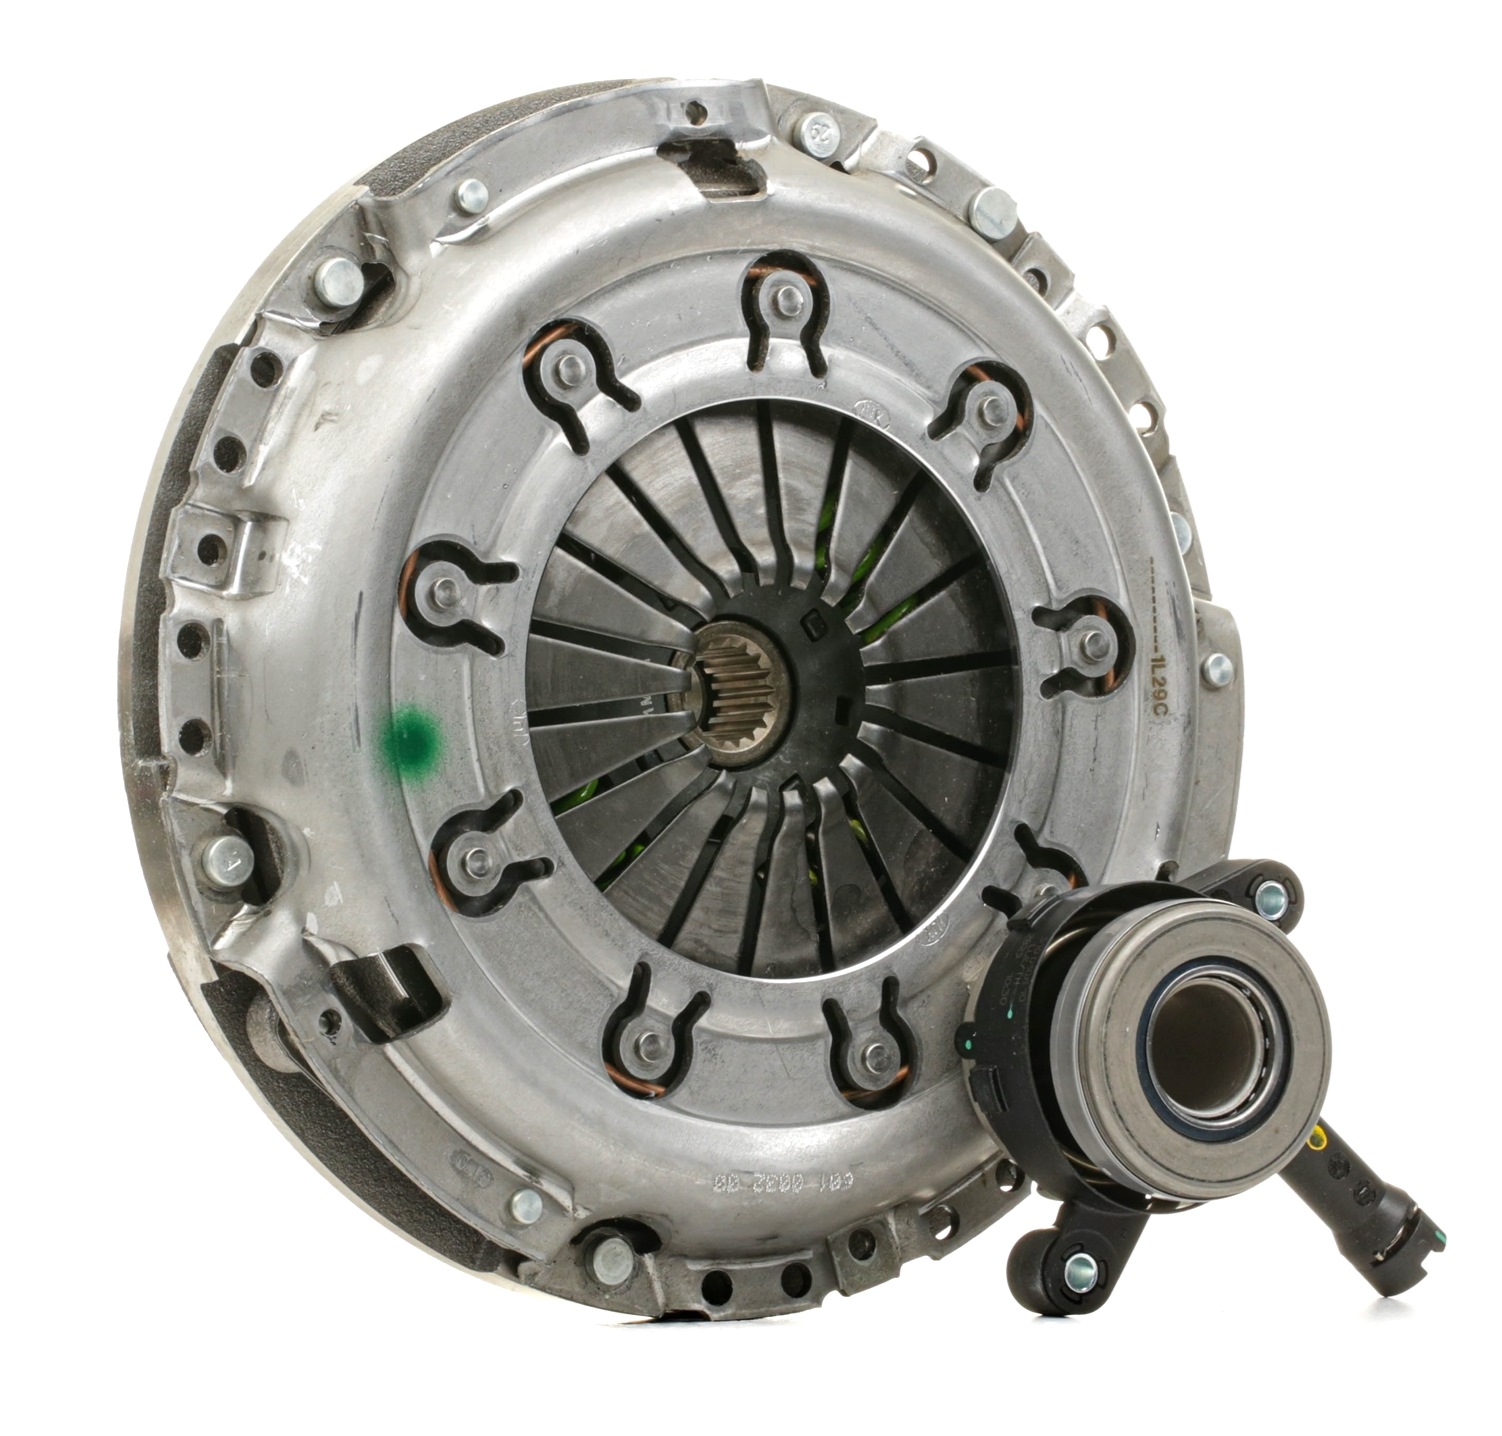 601 0026 00 LuK Clutch set DODGE with central slave cylinder, with flywheel, without screw set